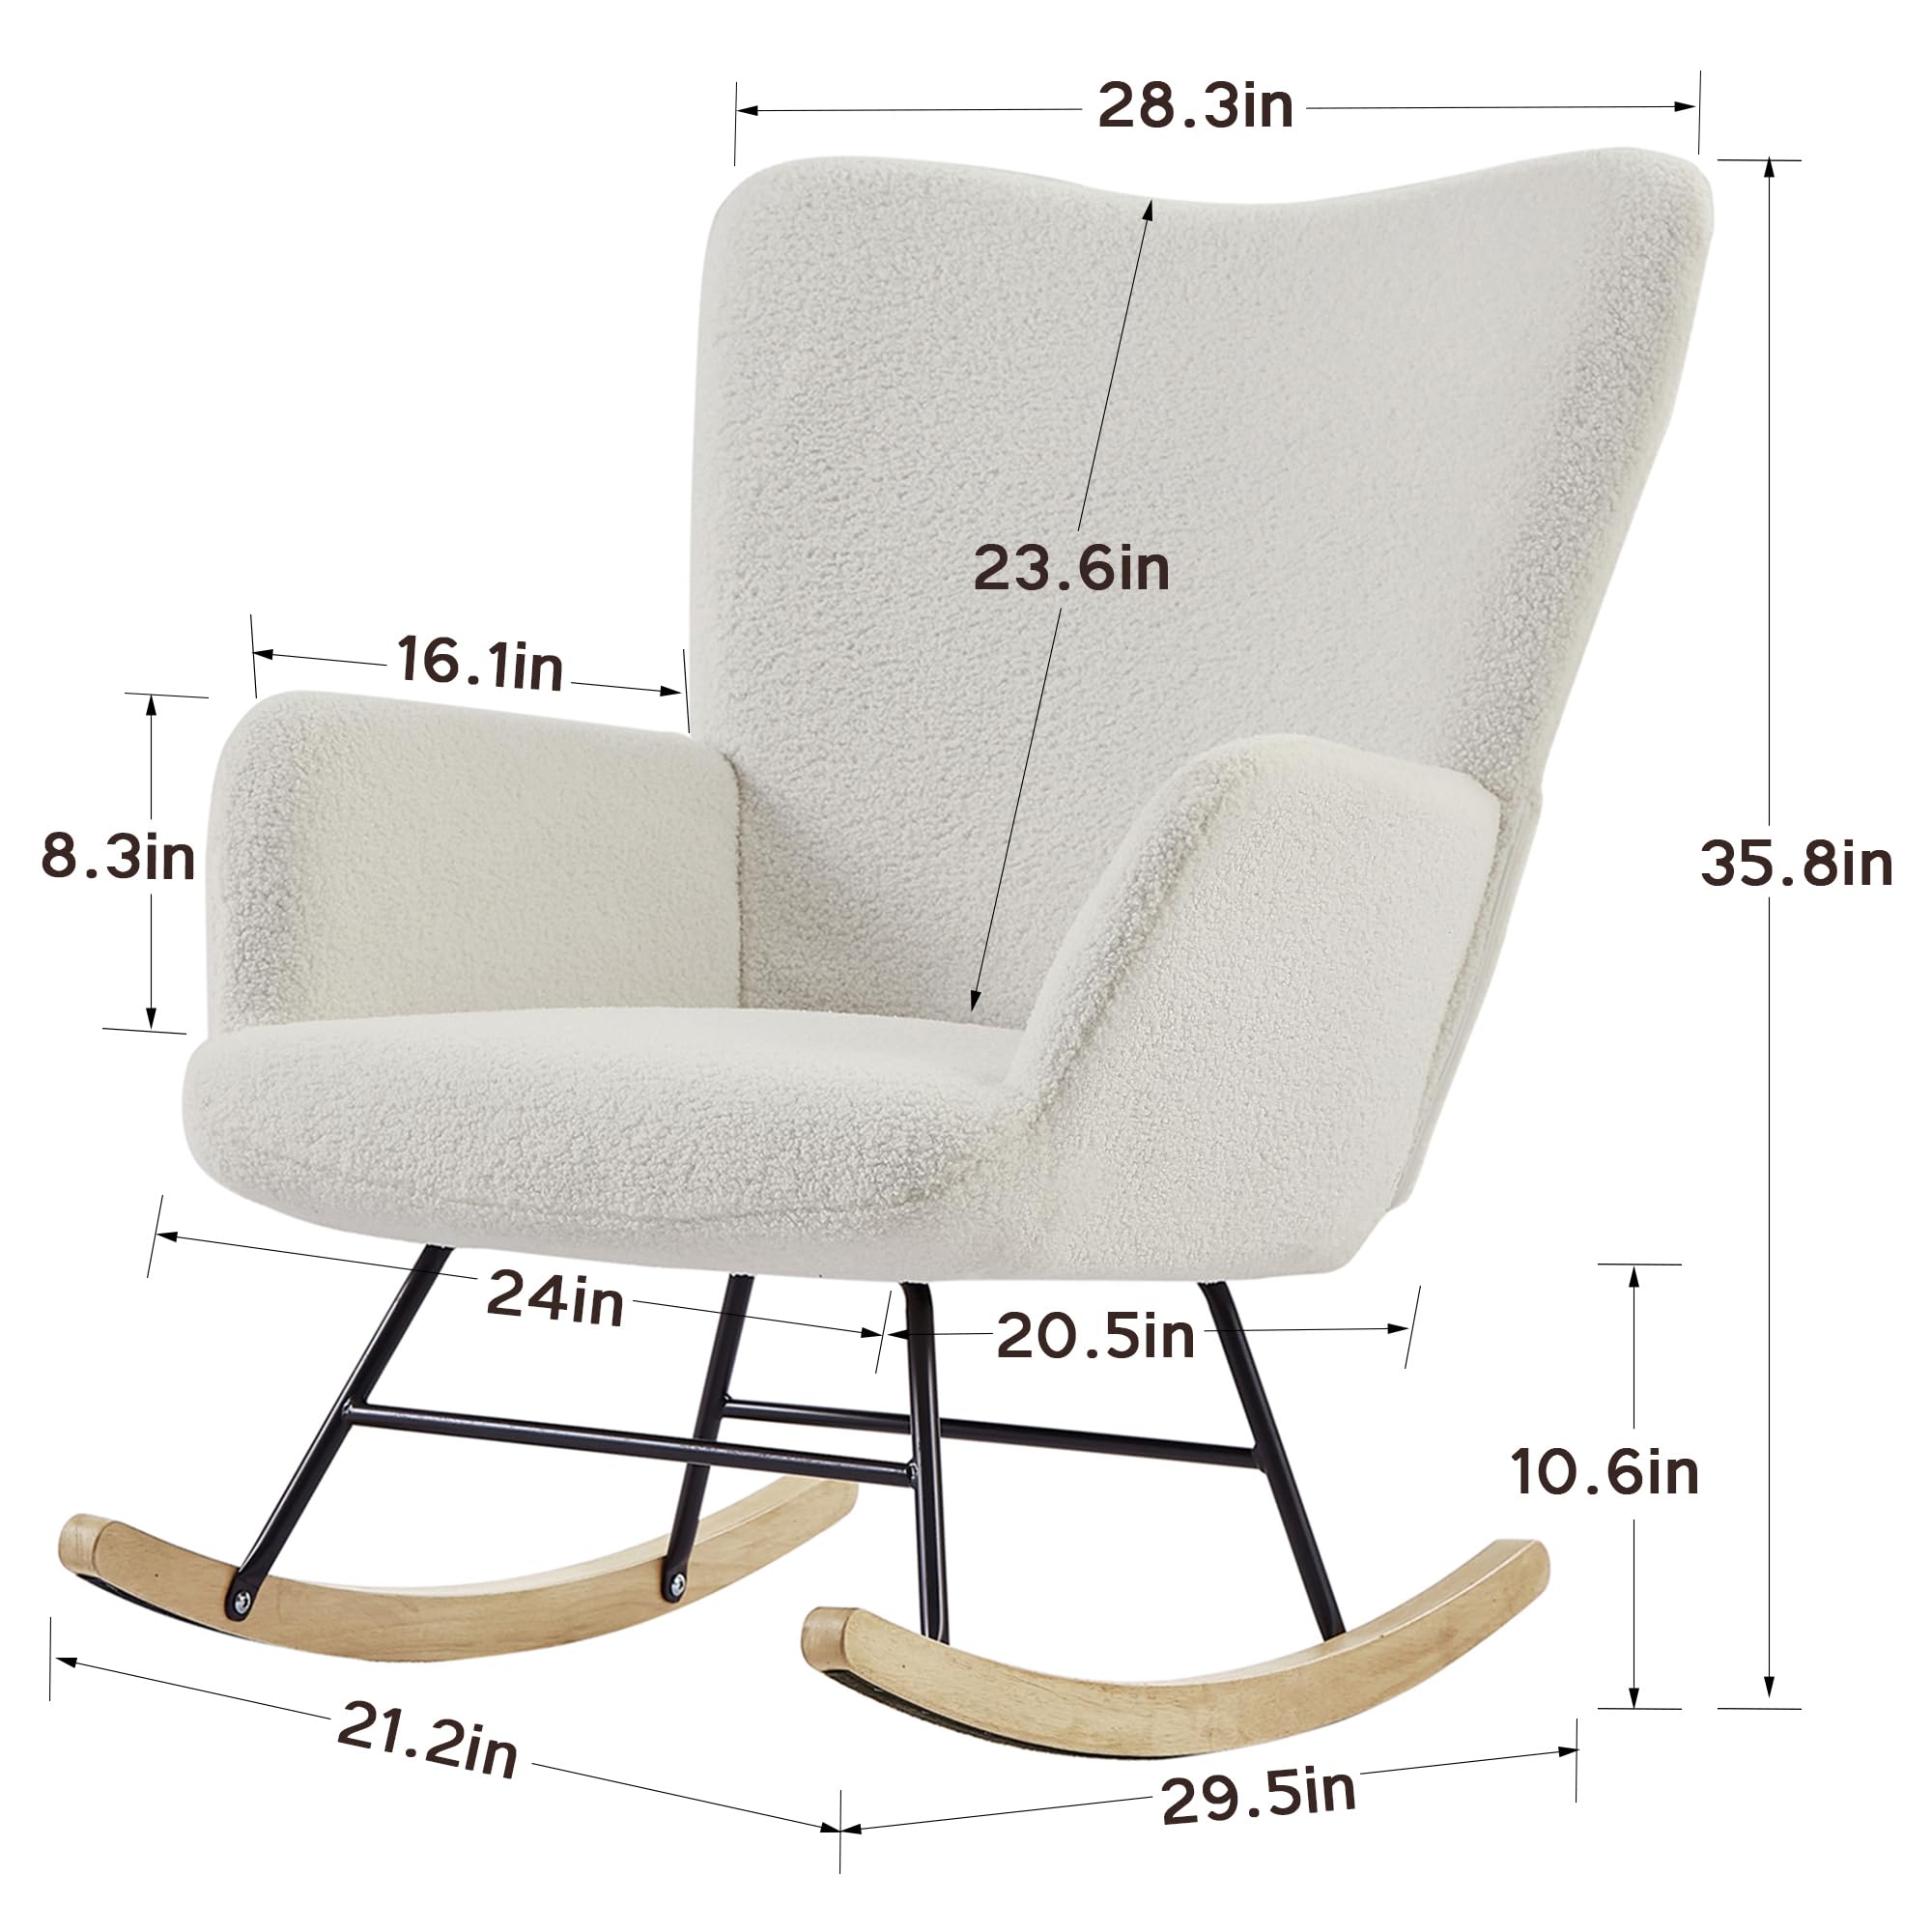 VECELO Rocking Chair, Modern Nursery Upholstered Glider Rocker Padded Seat with High Backrest Armchair with Pocket for Living Room, Bedroom, Offices, Balcony, White